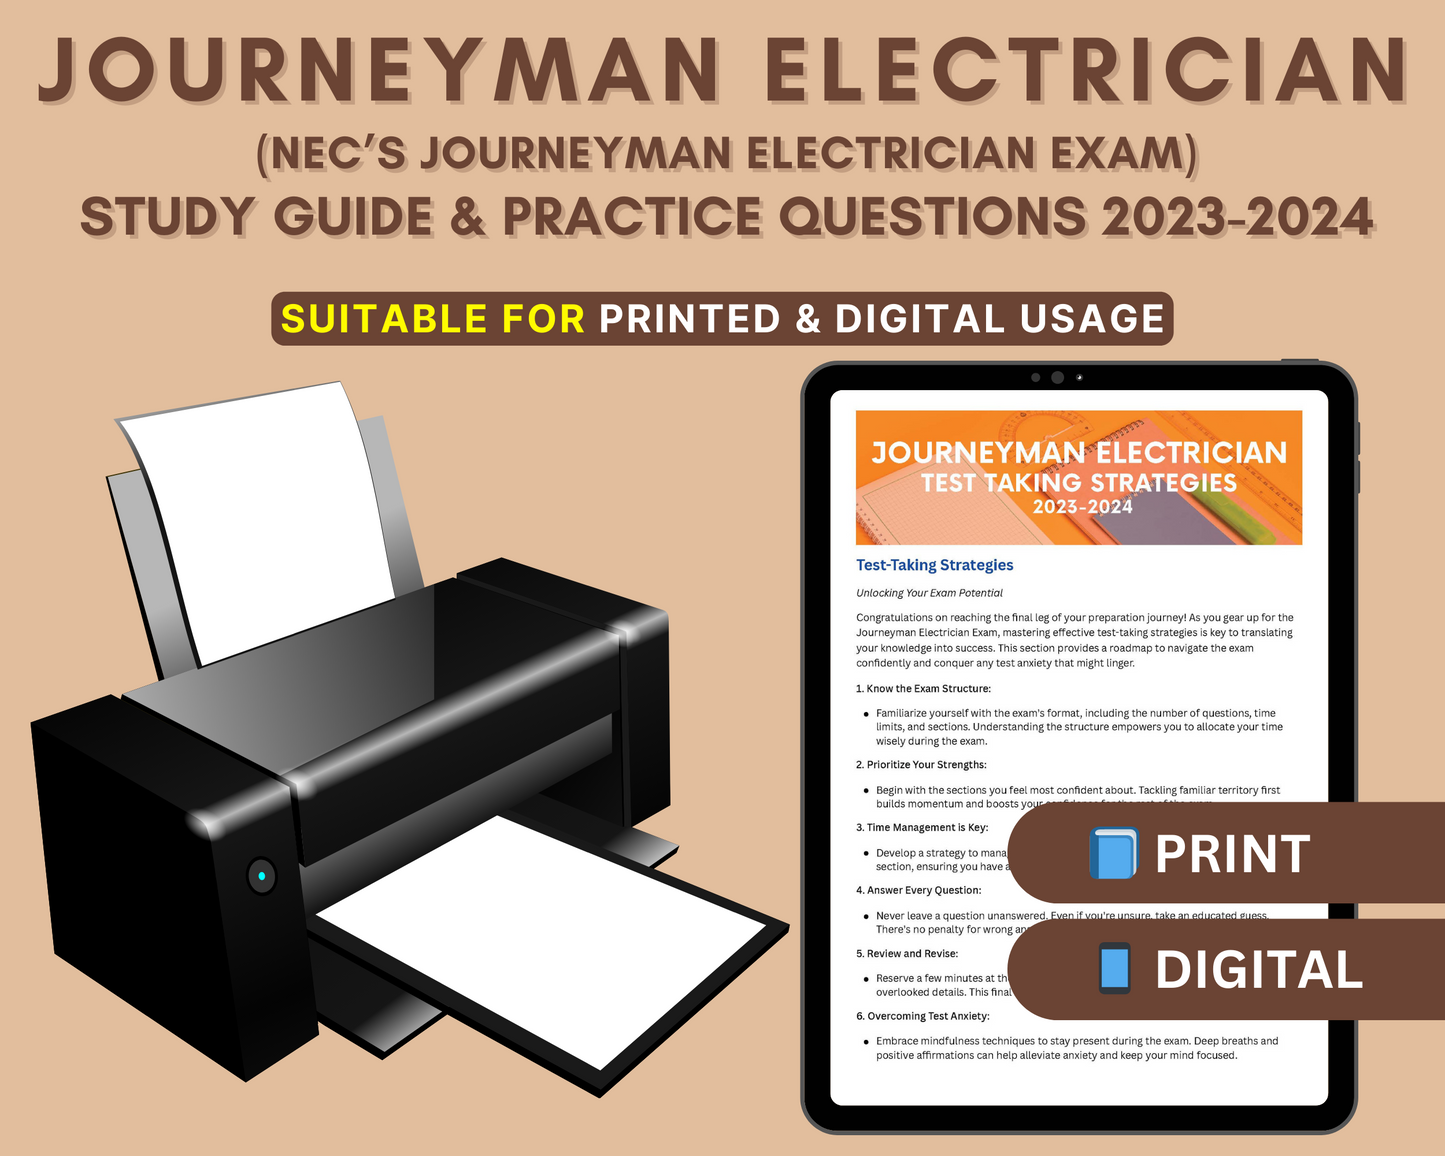 Journeyman Electrician Exam Prep 2023-24: In-Depth Content Review, Practice Tests & Exam Tips for Aspiring Electricians!